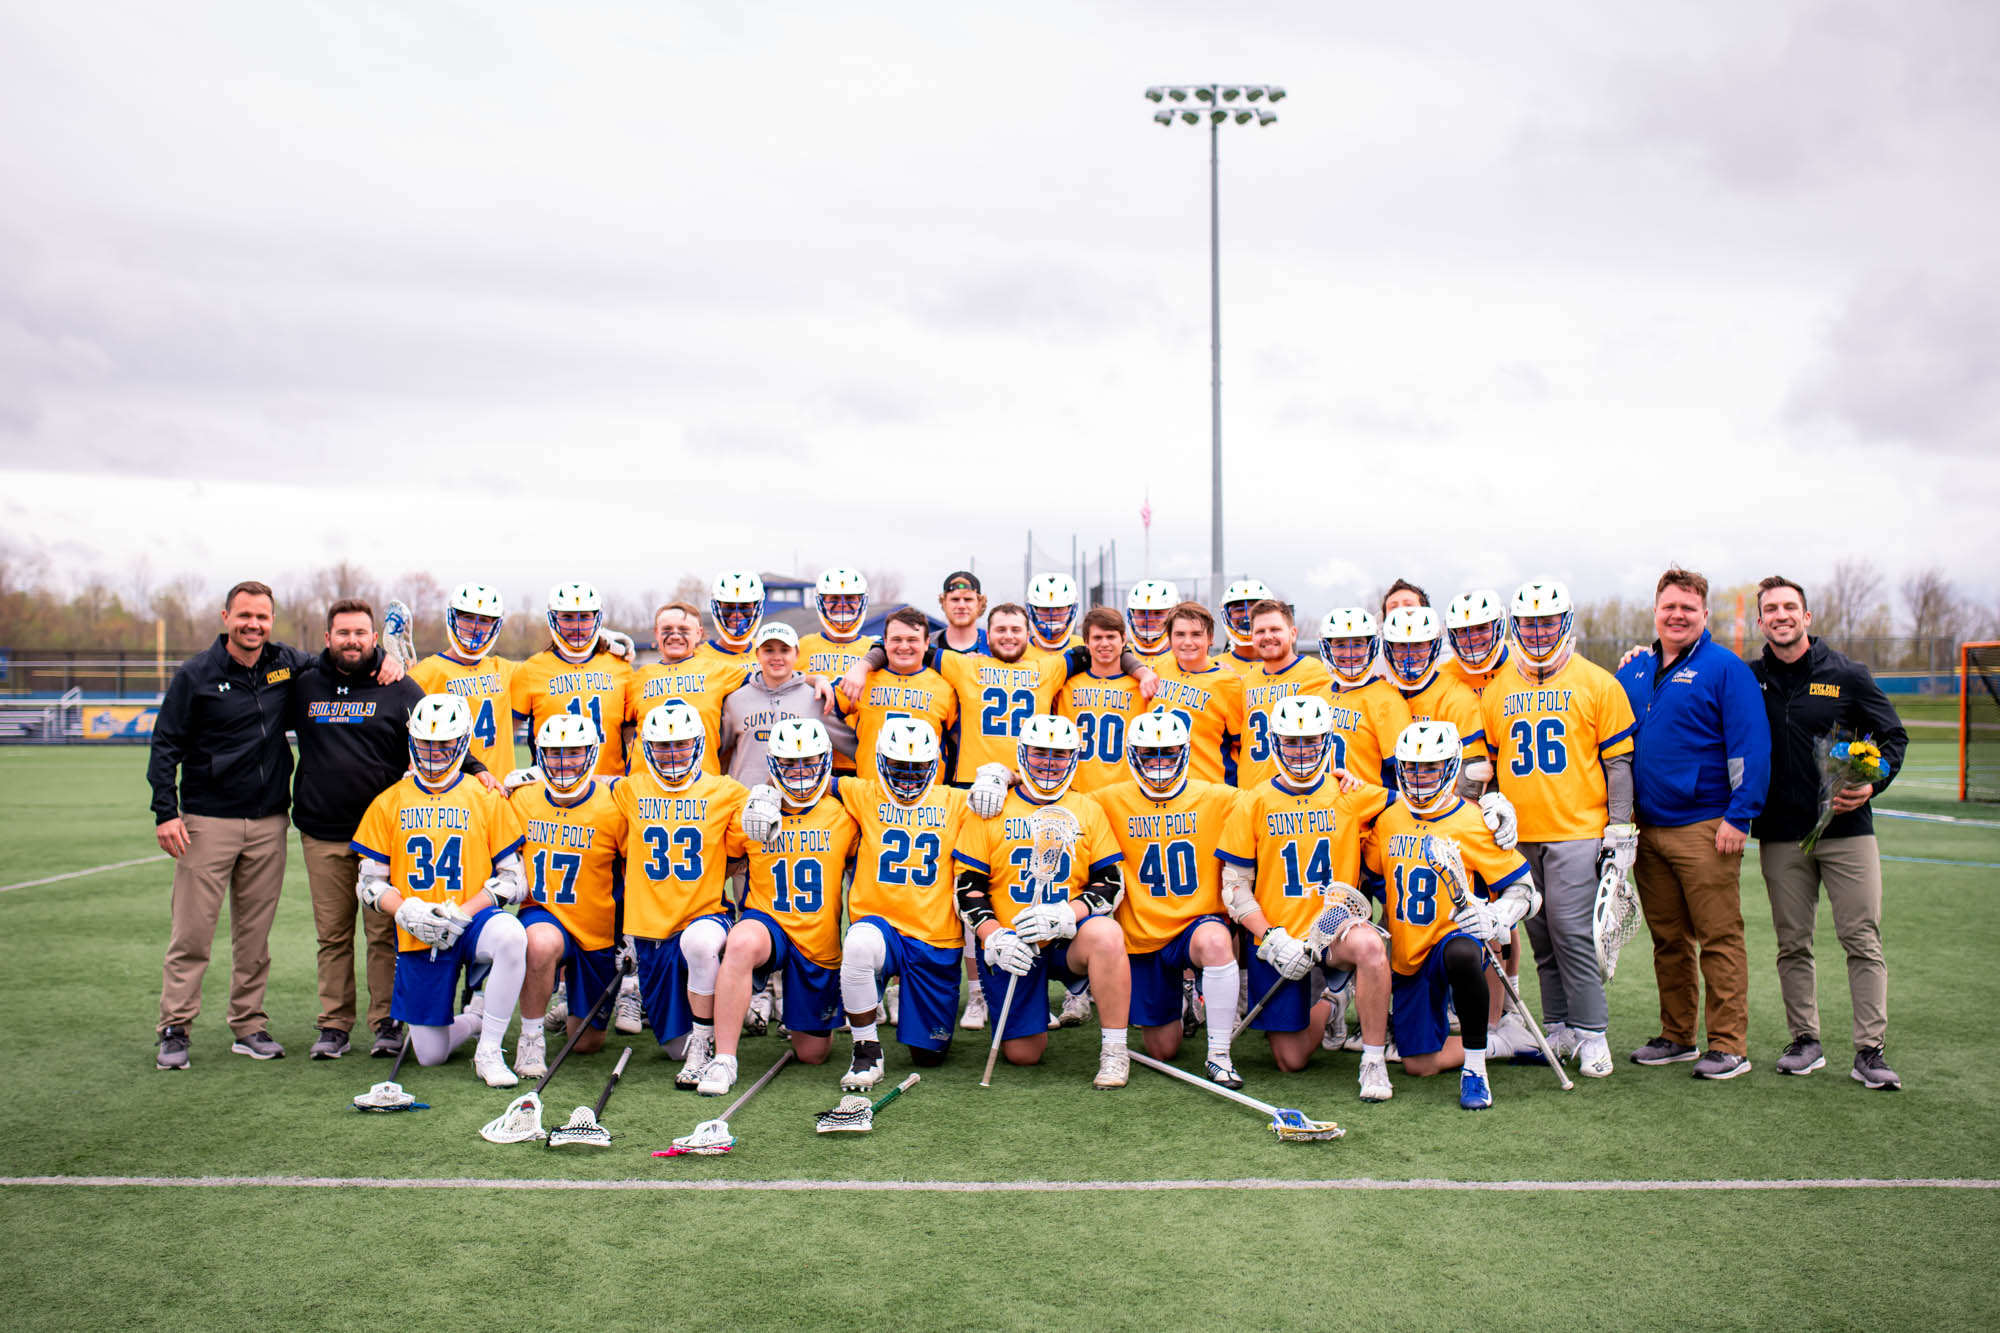 MLAX: Wildcats Wrap-up Regular Season With a 10-8 Win Over Cobleskill on Senior Day.